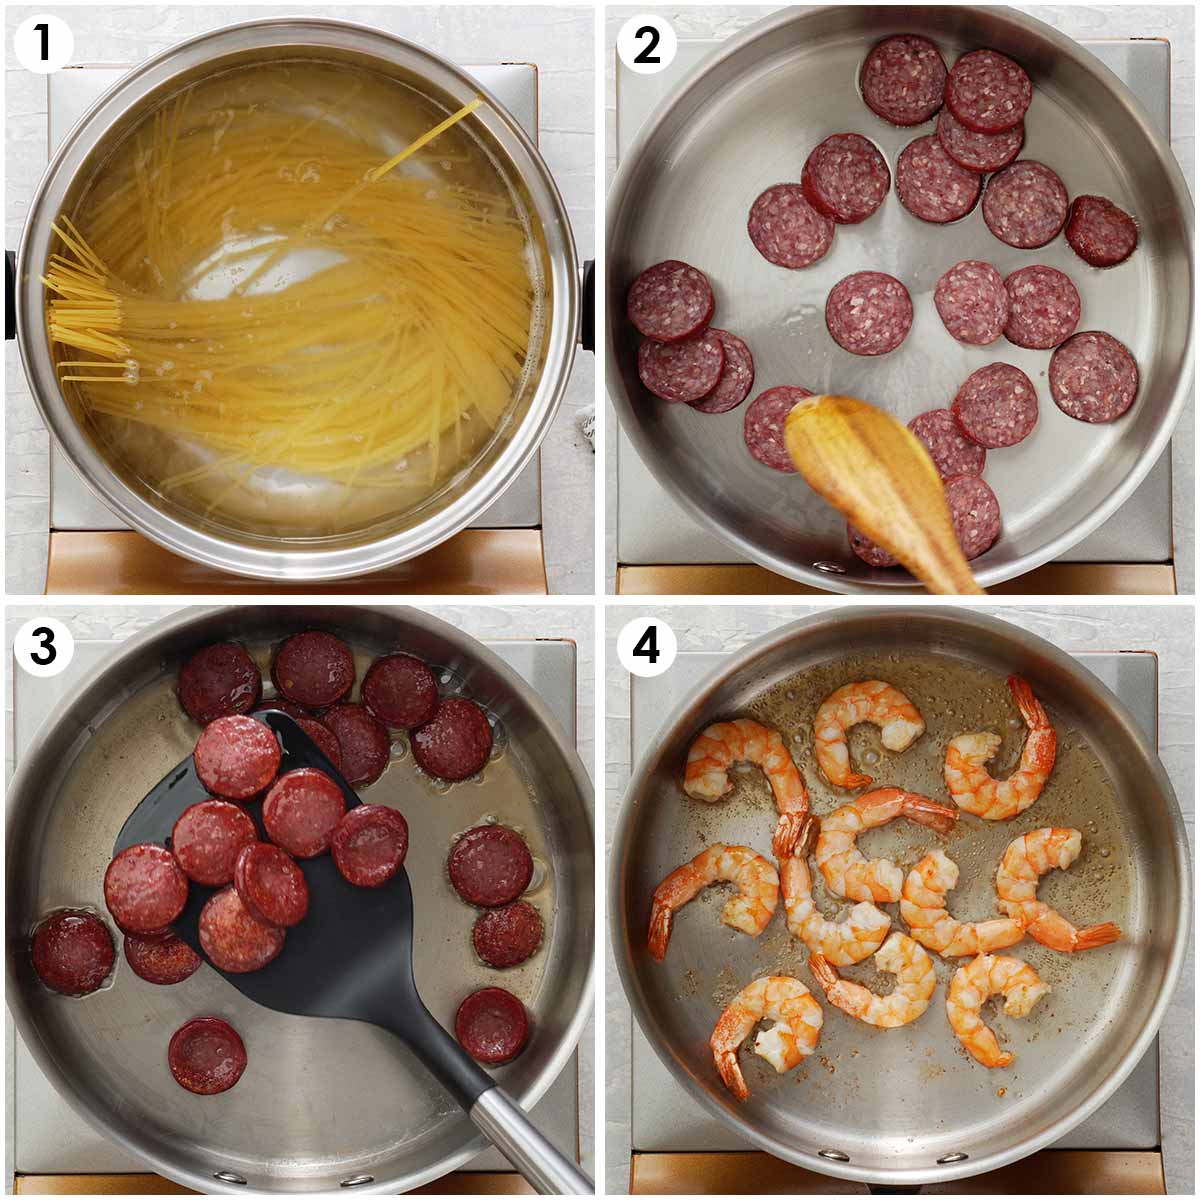 Four image collage showing how to prepare spaghetti, chorizo and prawns. 